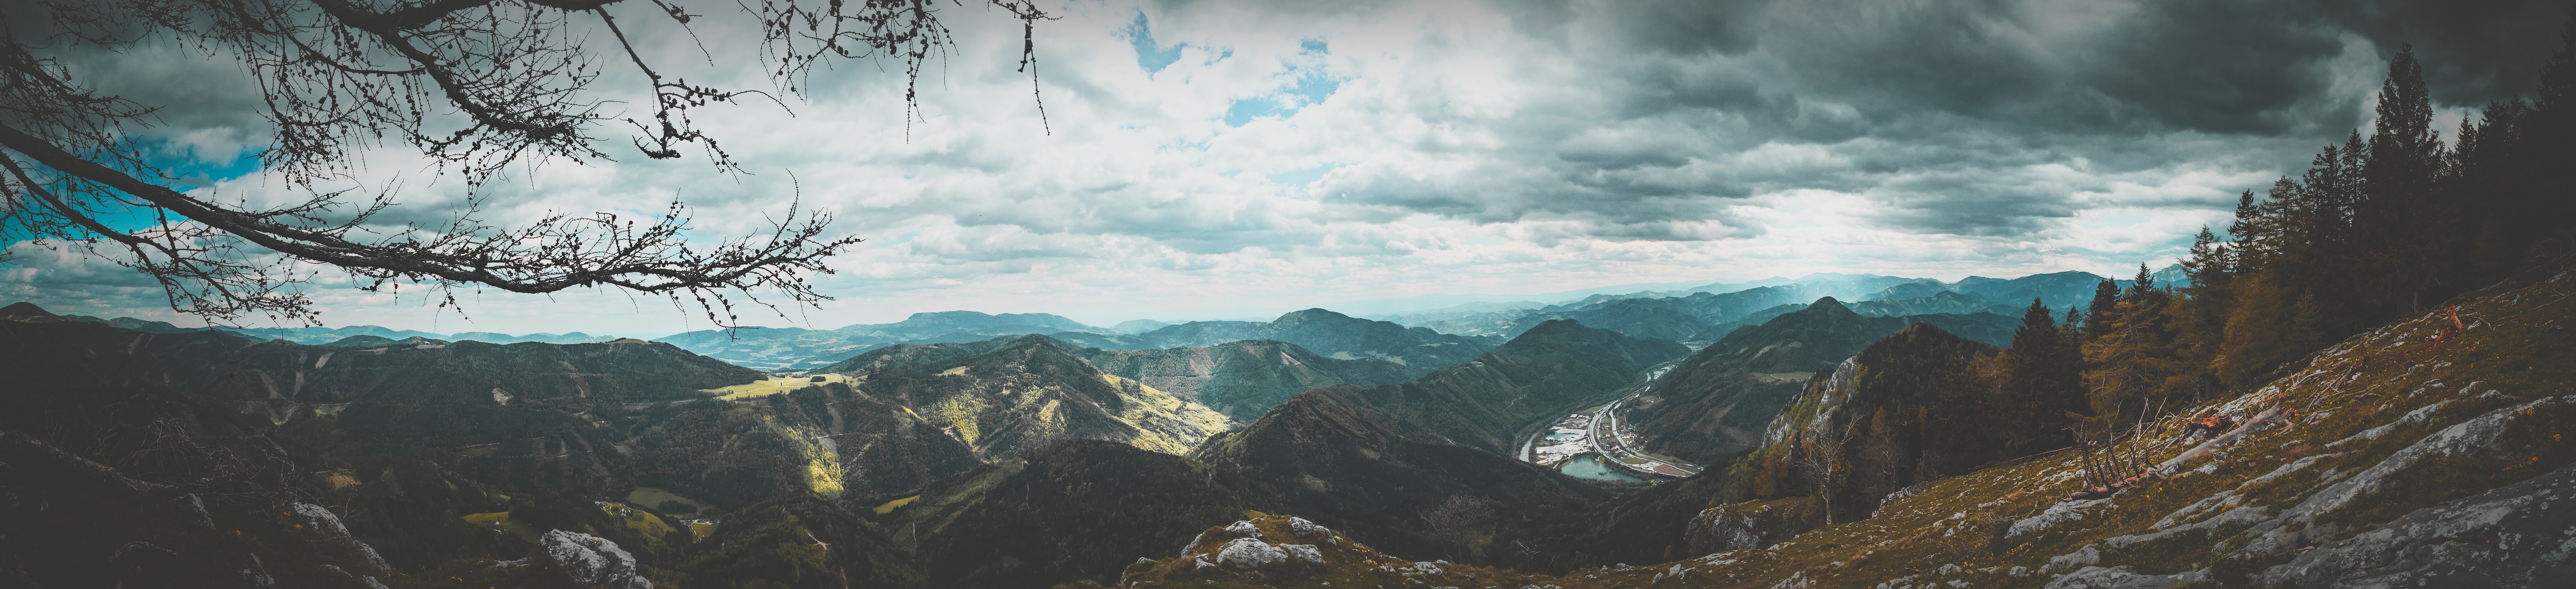 Free photo Wide panoramic photograph showing mountains